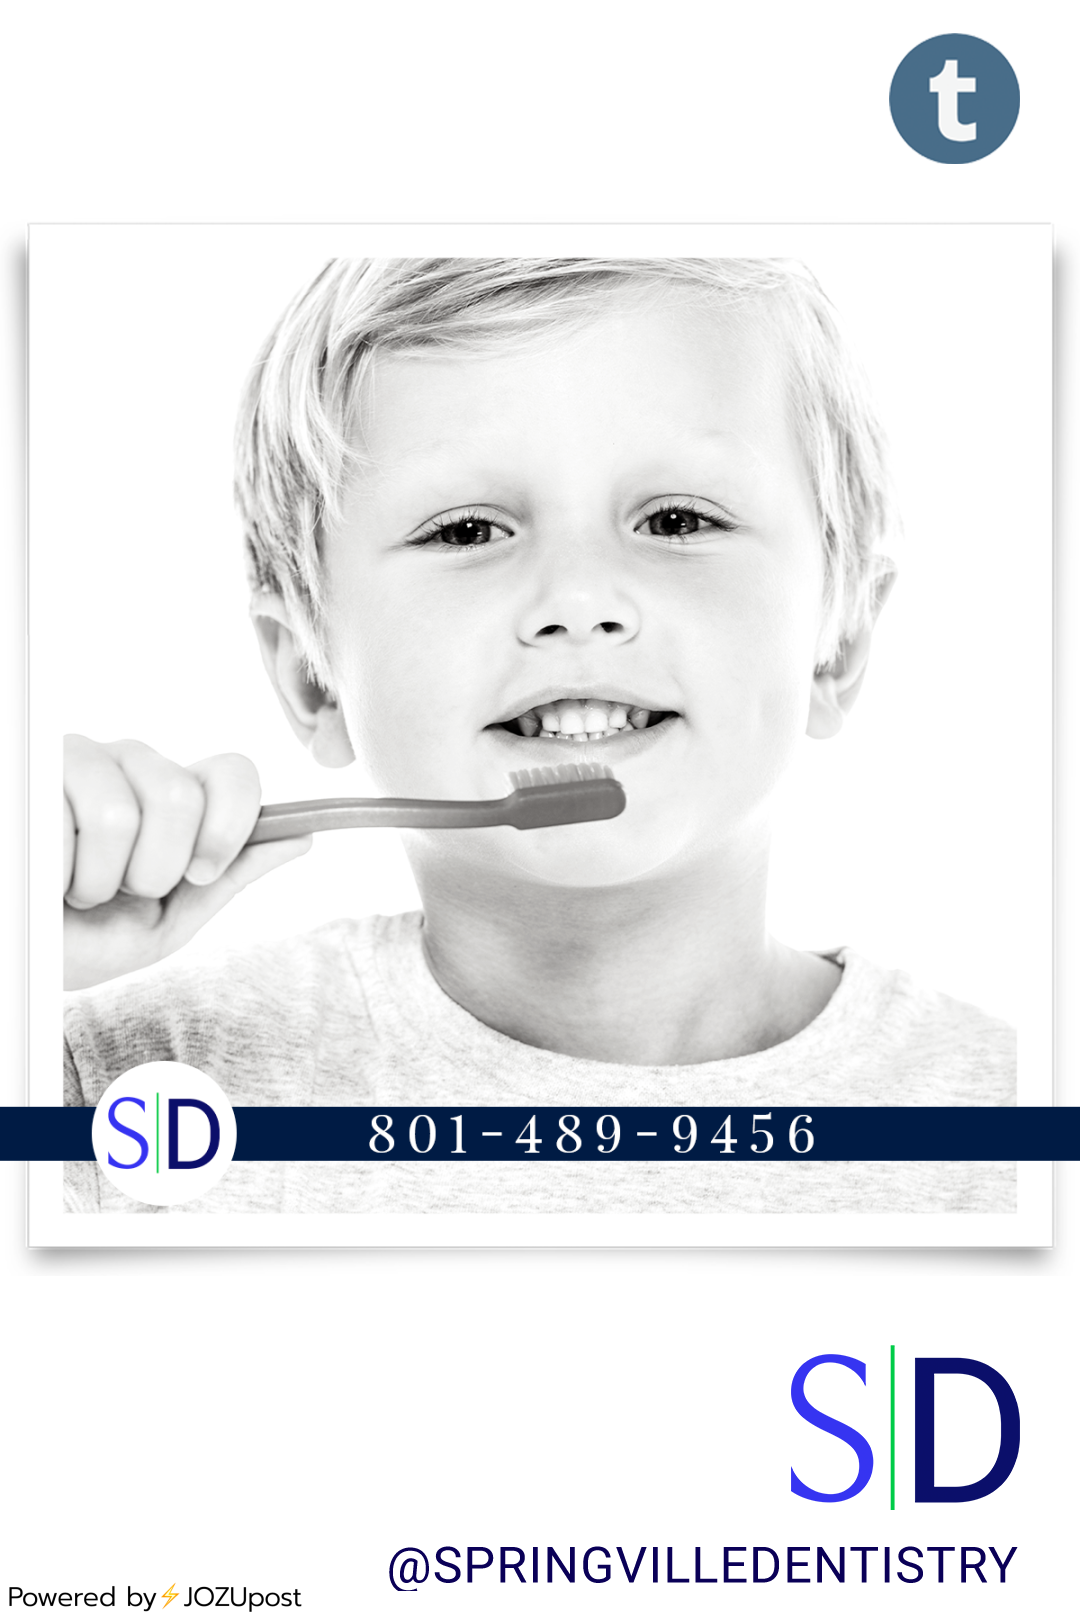 Discover the best dental services near Provo, Utah, at Springville Dentistry.
We provide a wide range of services, including general dentistry, cosmetic dentistry, dental implants, digital dentistry, sedation dentistry, and wisdom tooth...